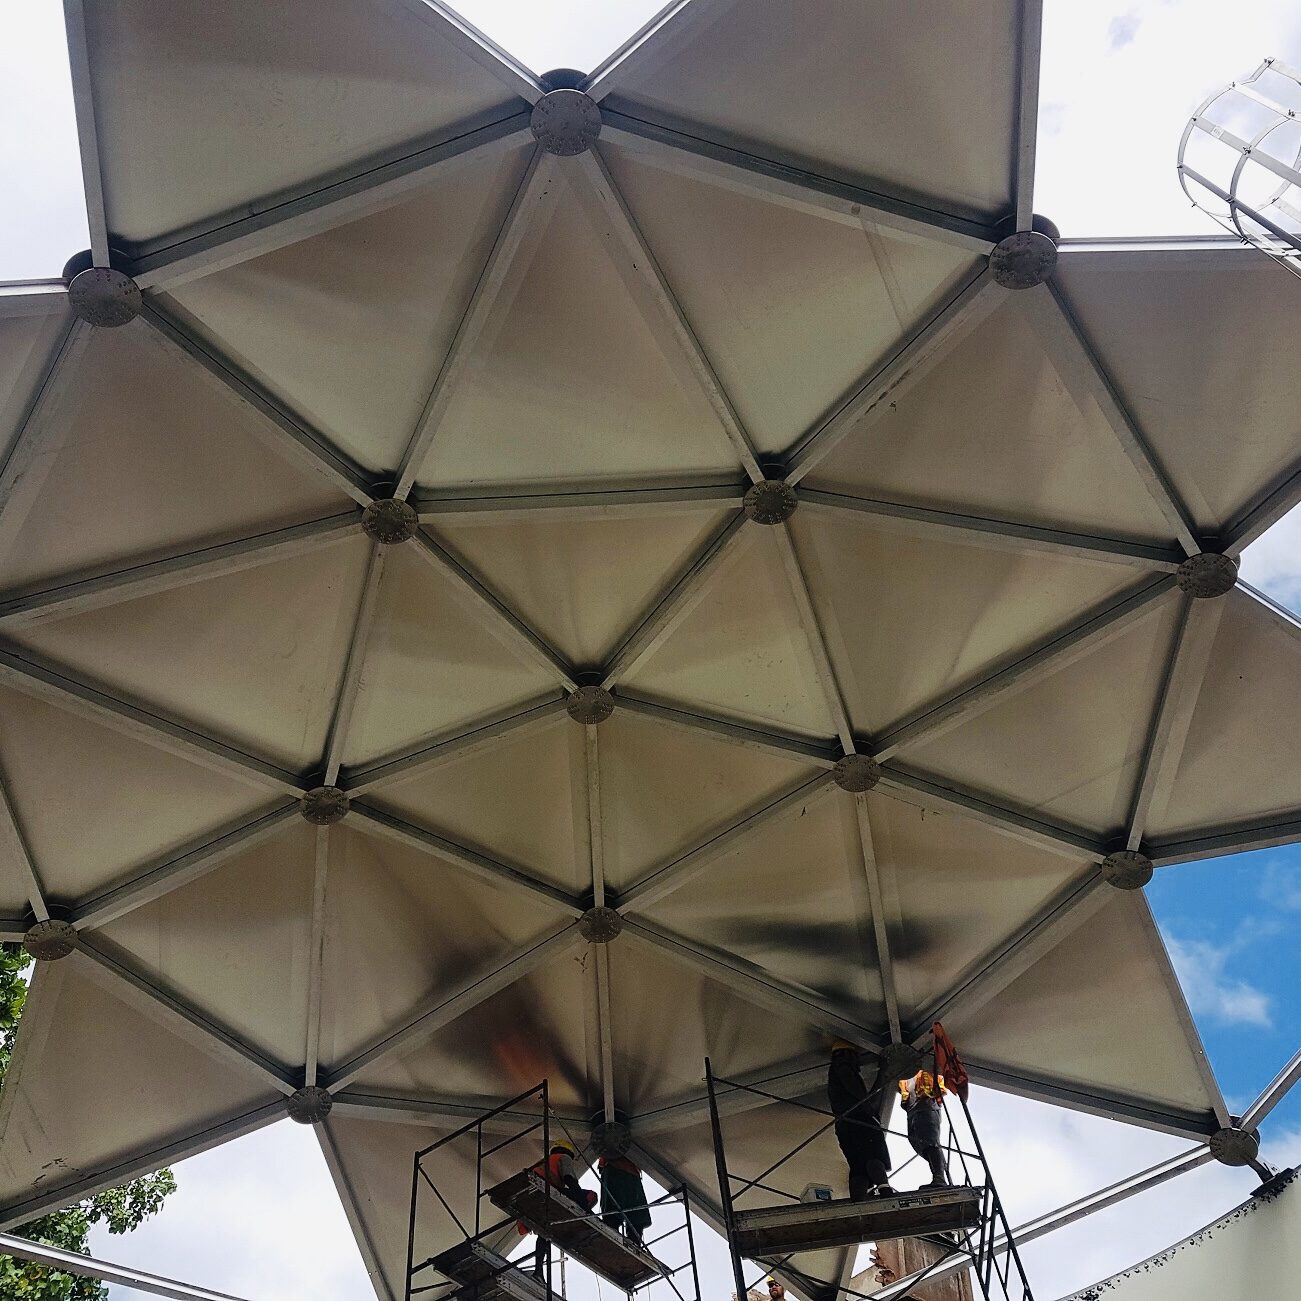 Underside of an aluminum geodesic dome in a star shape. Cloudy blue sky and safety cage.